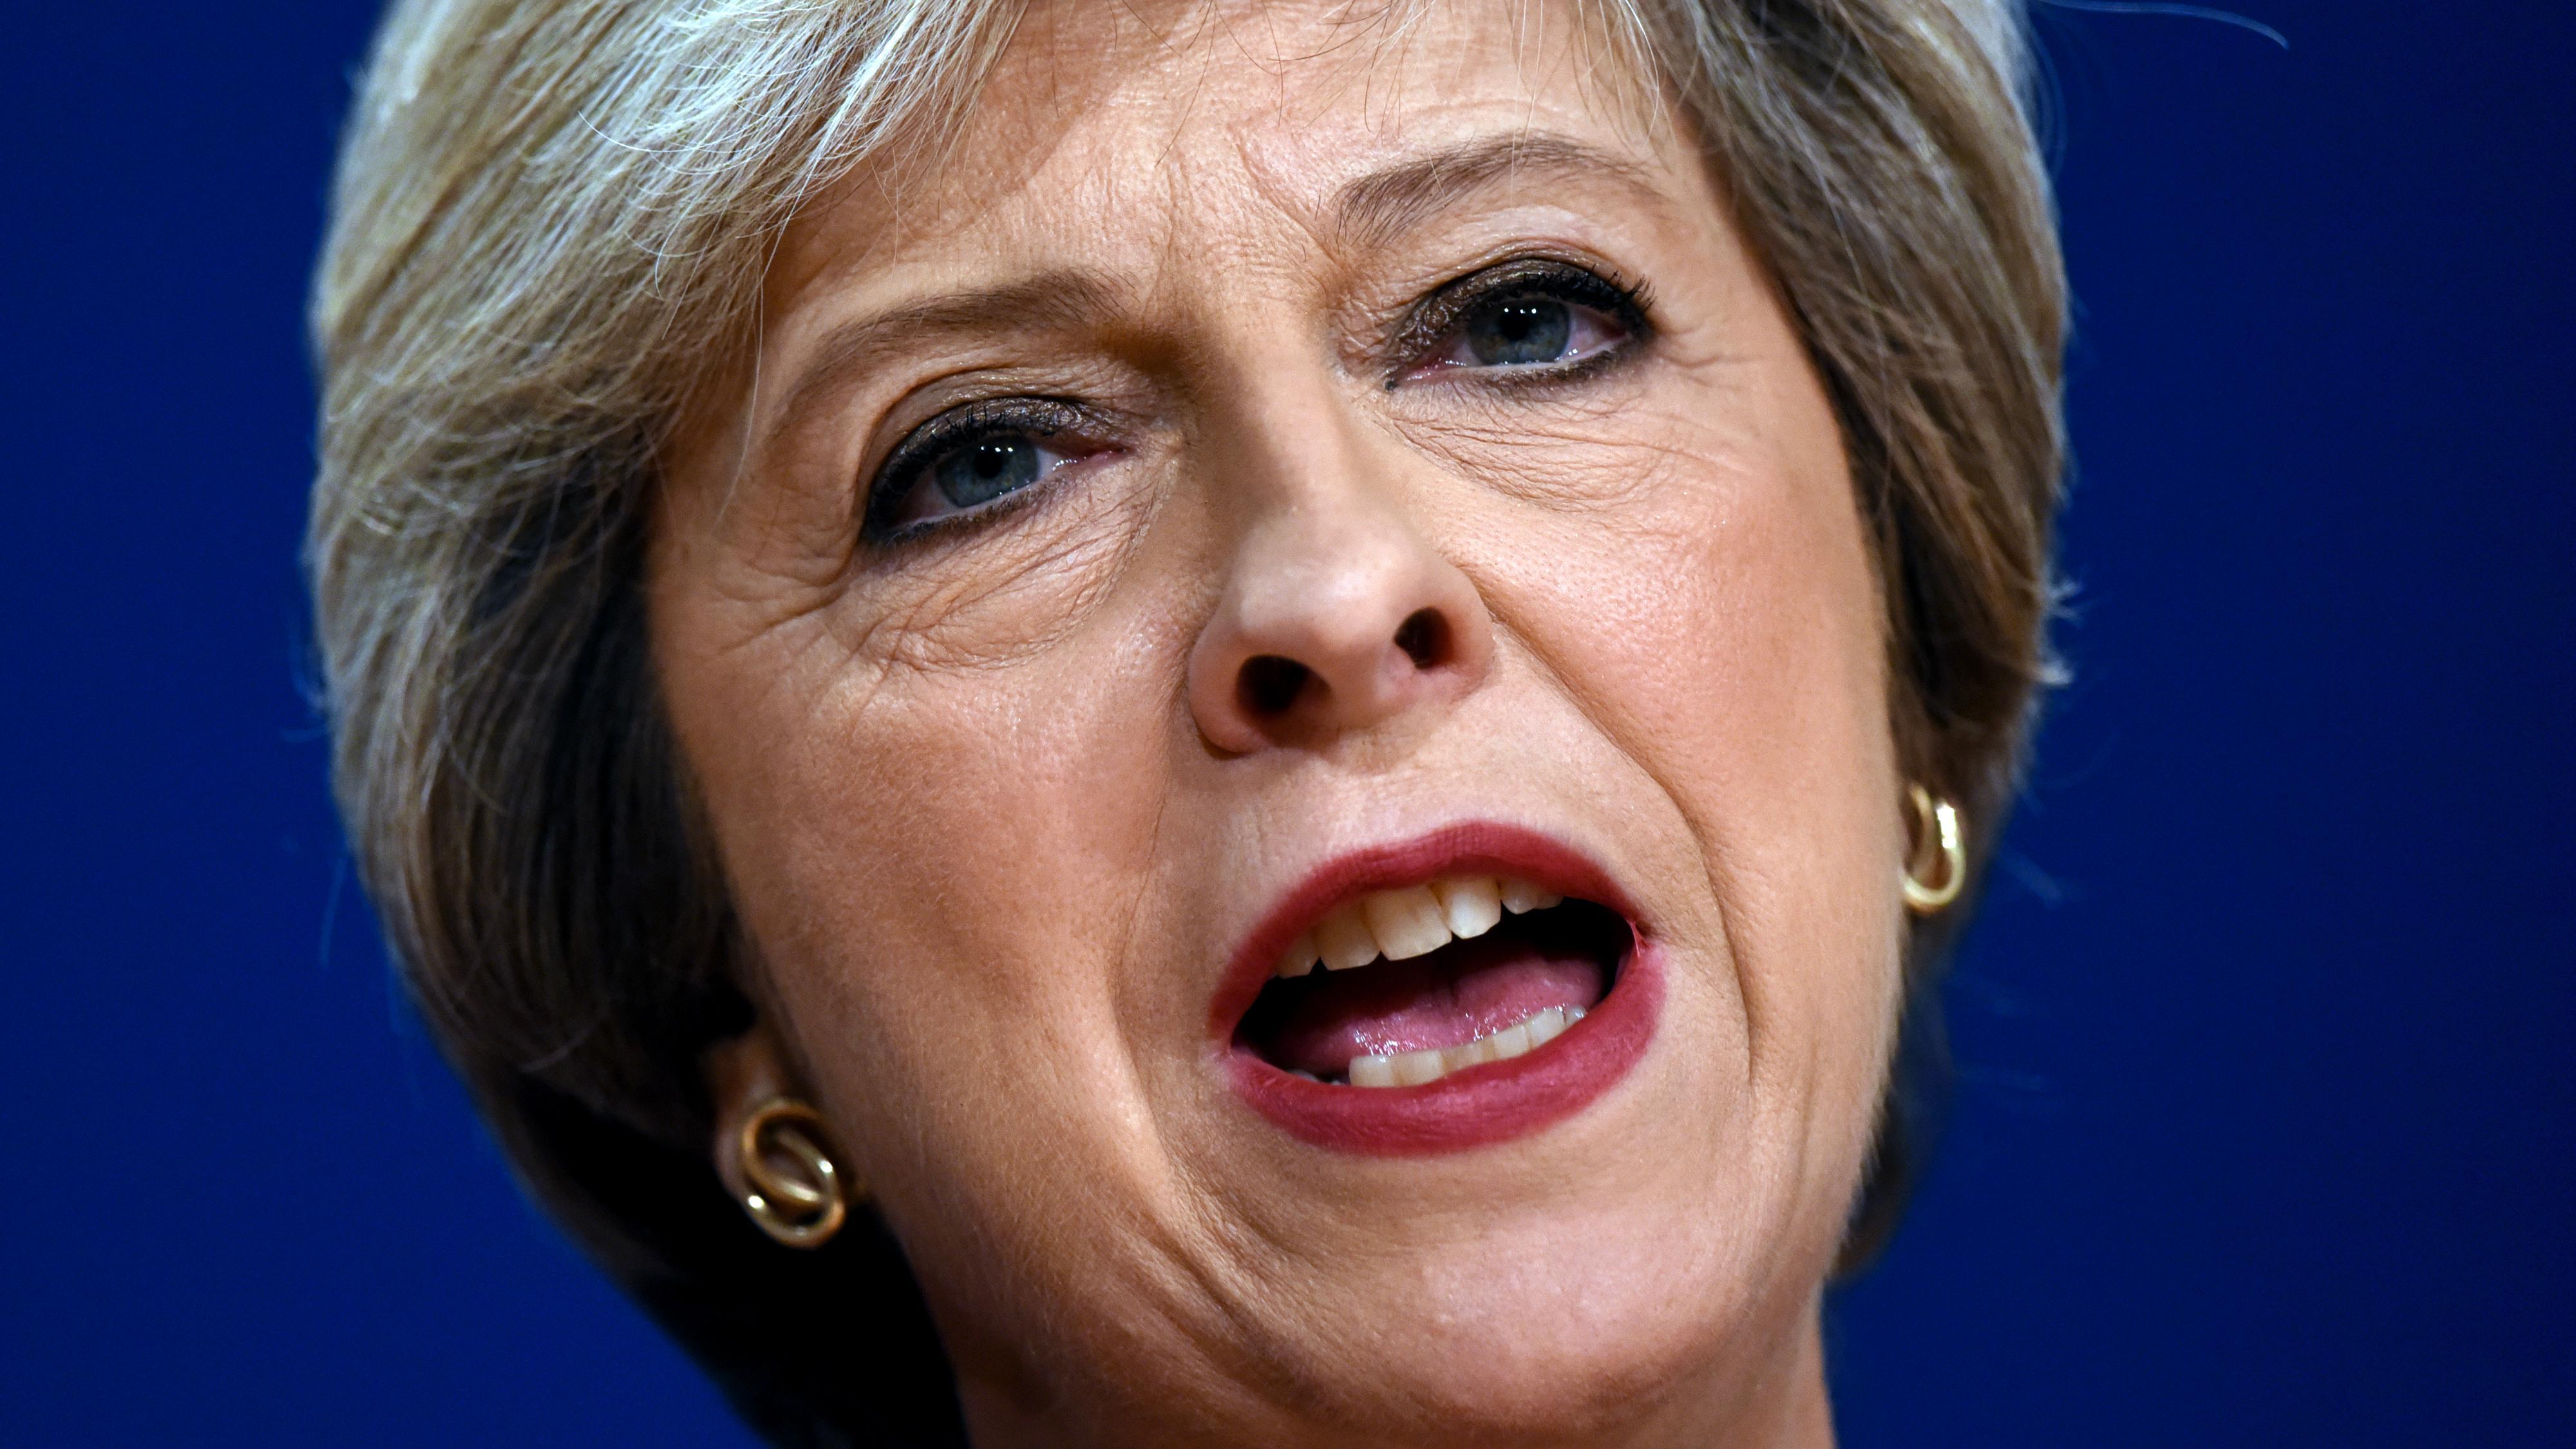 Has Theresa May broken her promise to workers?. The Week UK